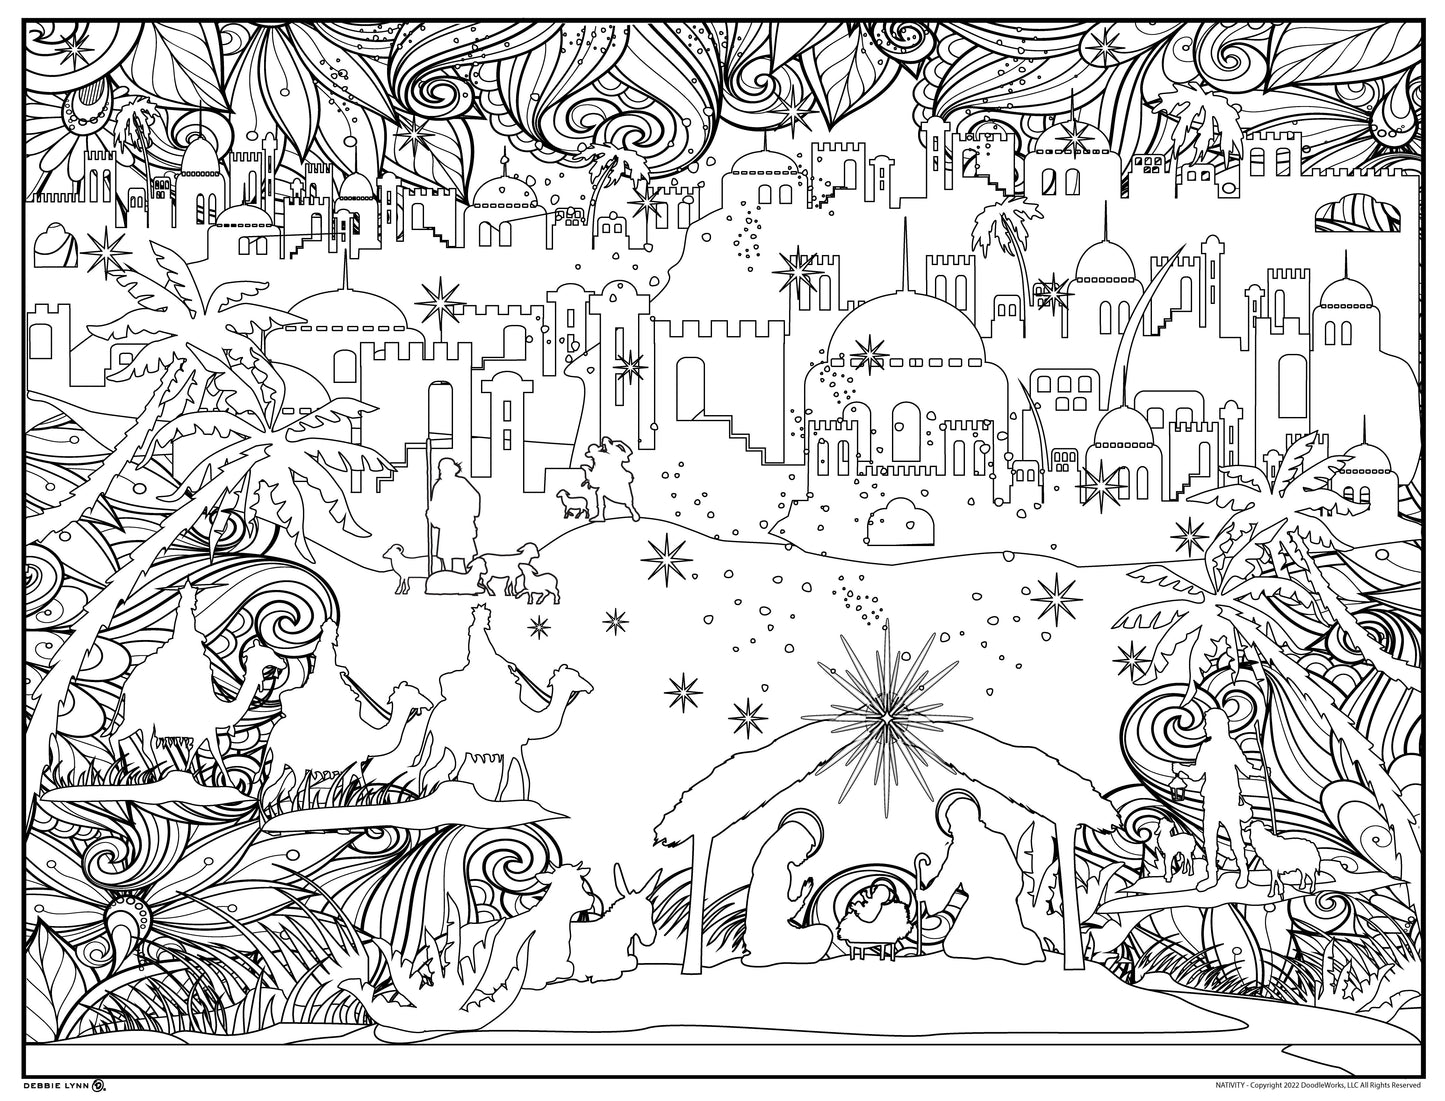 NATIVITY FAITH PERSONALIZED GIANT COLORING POSTER 46"x60"